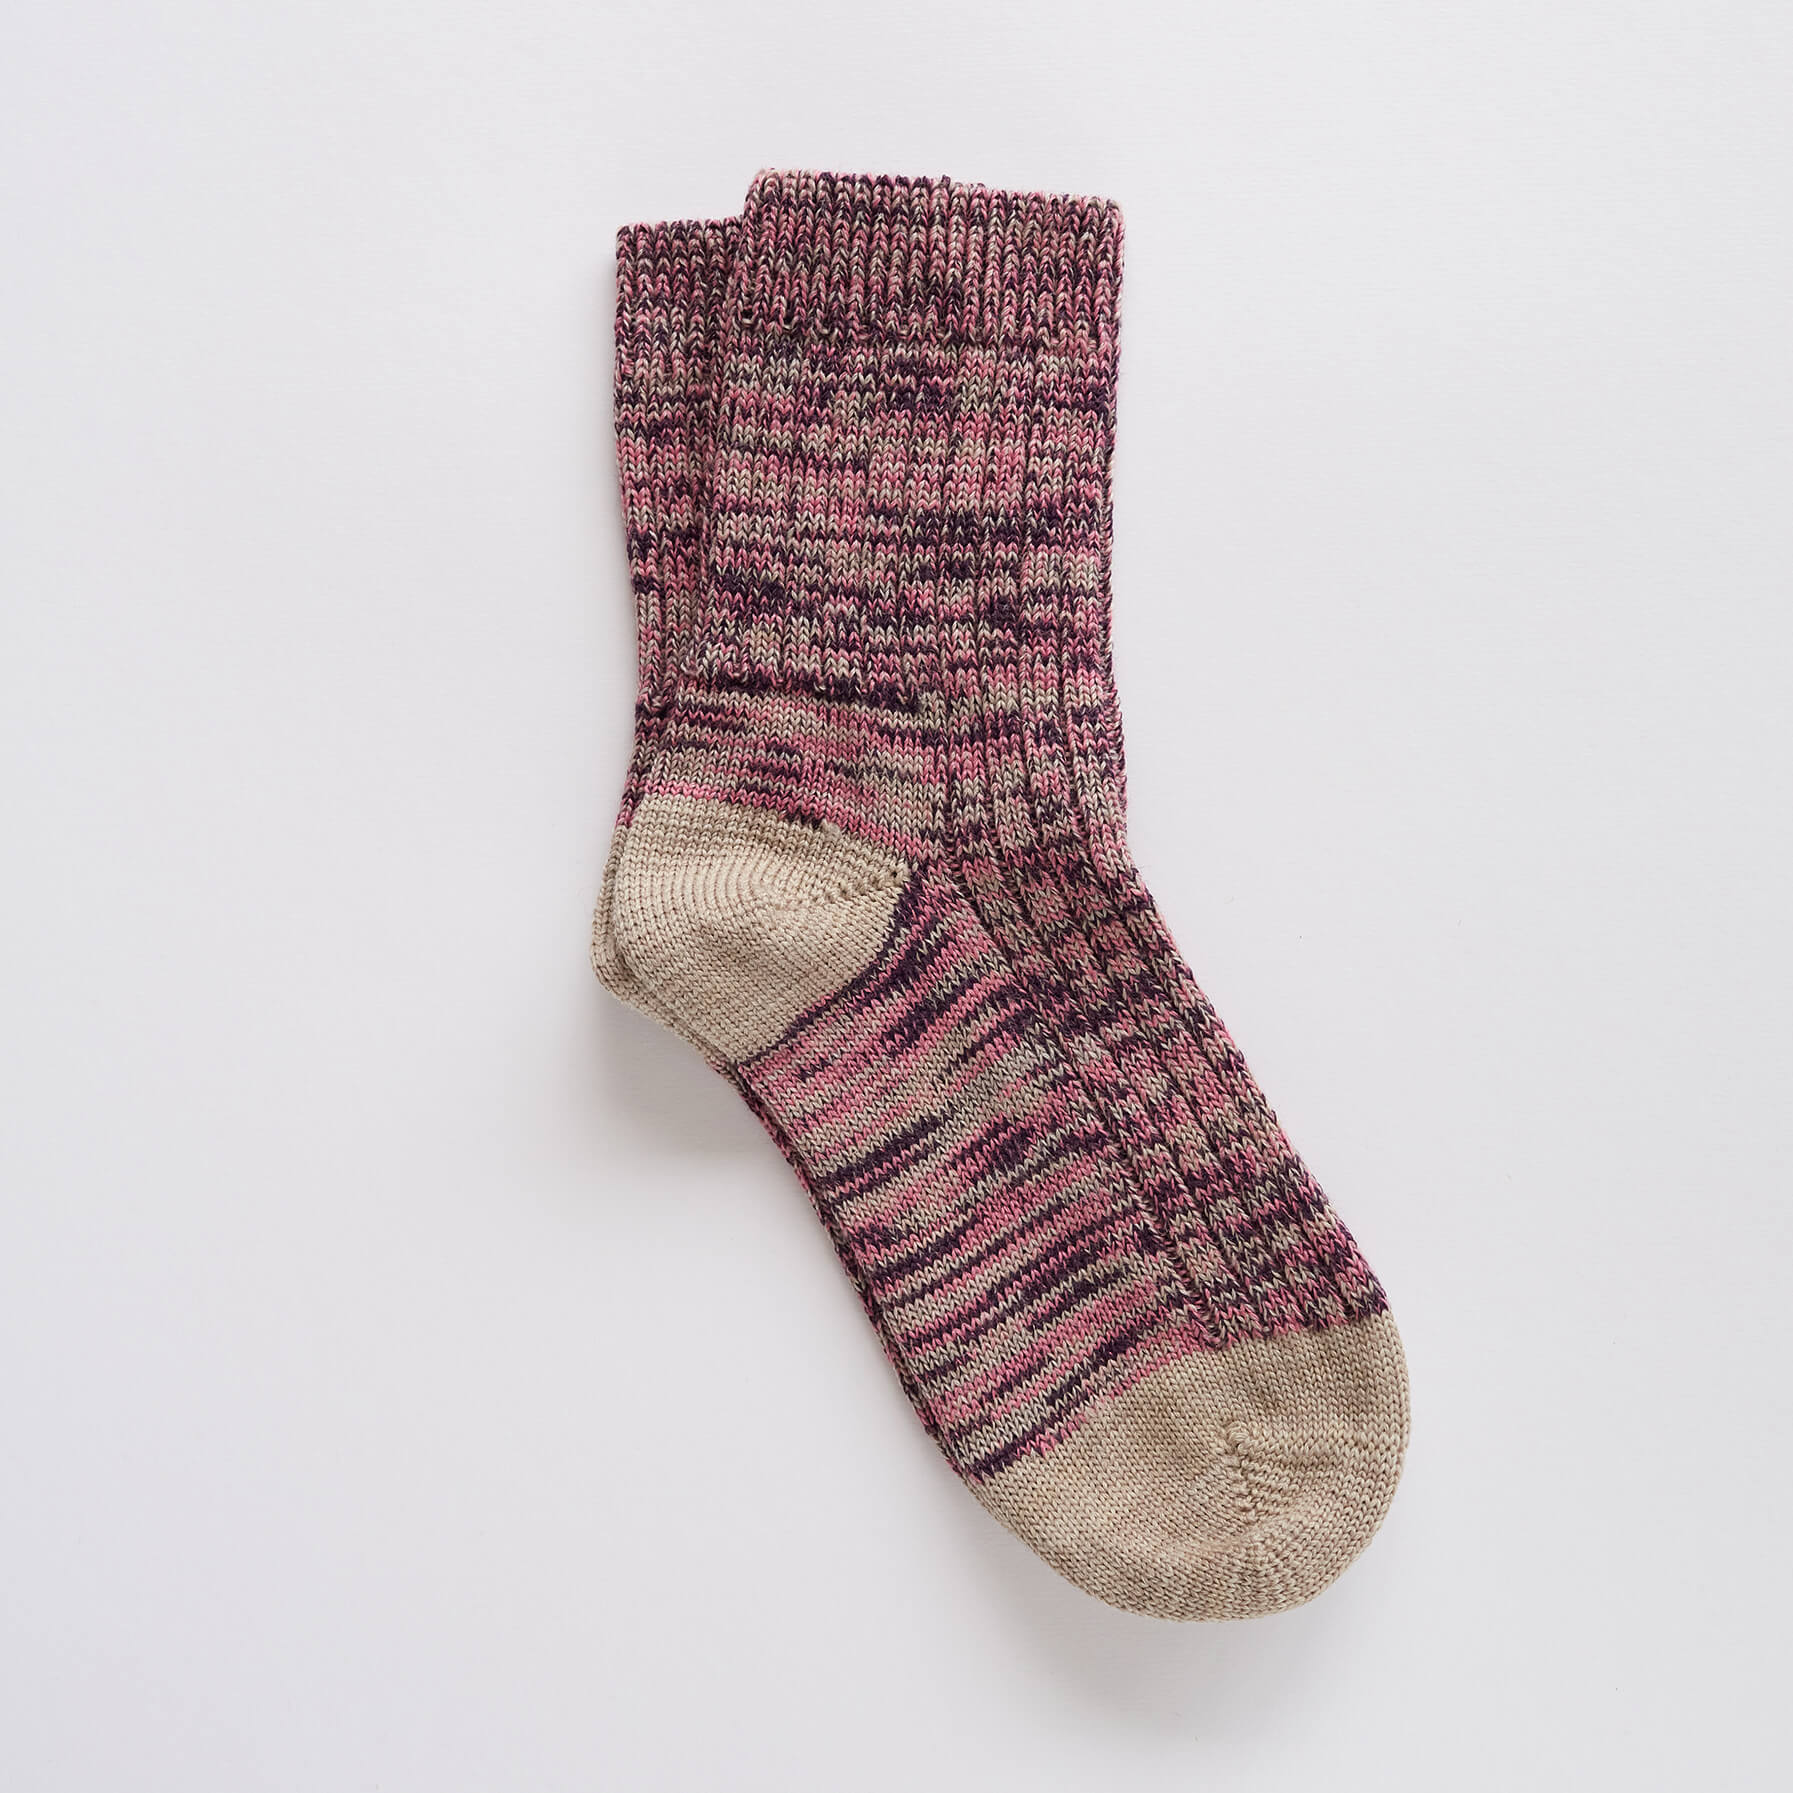 The Every Space Josie wool socks in pink rose by Rock and Ruby